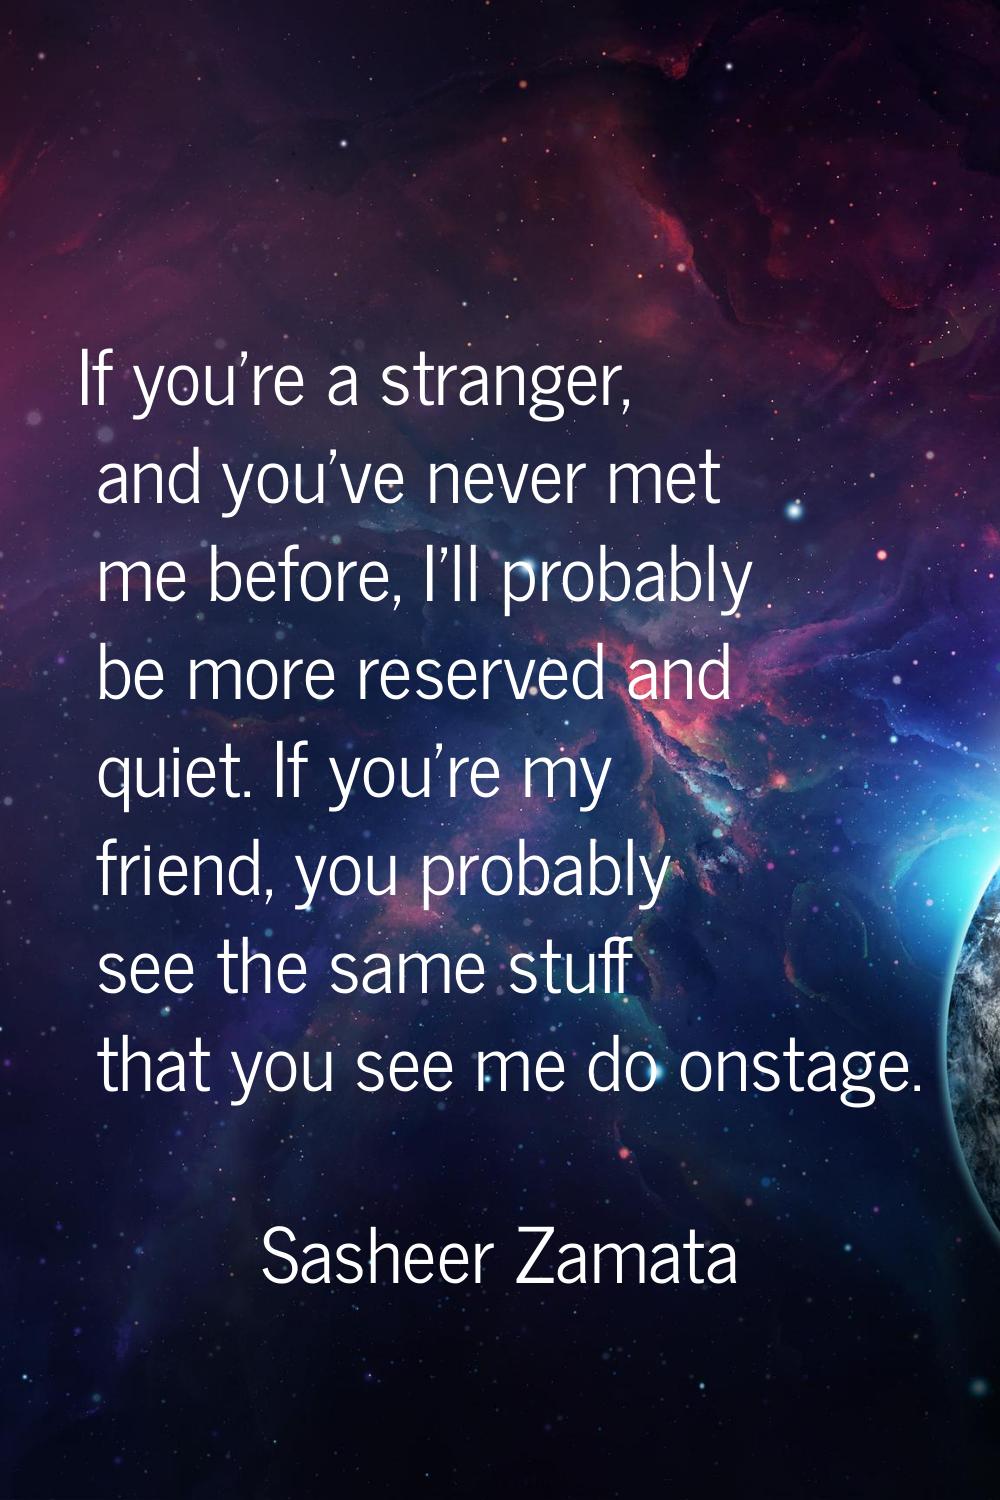 If you're a stranger, and you've never met me before, I'll probably be more reserved and quiet. If 